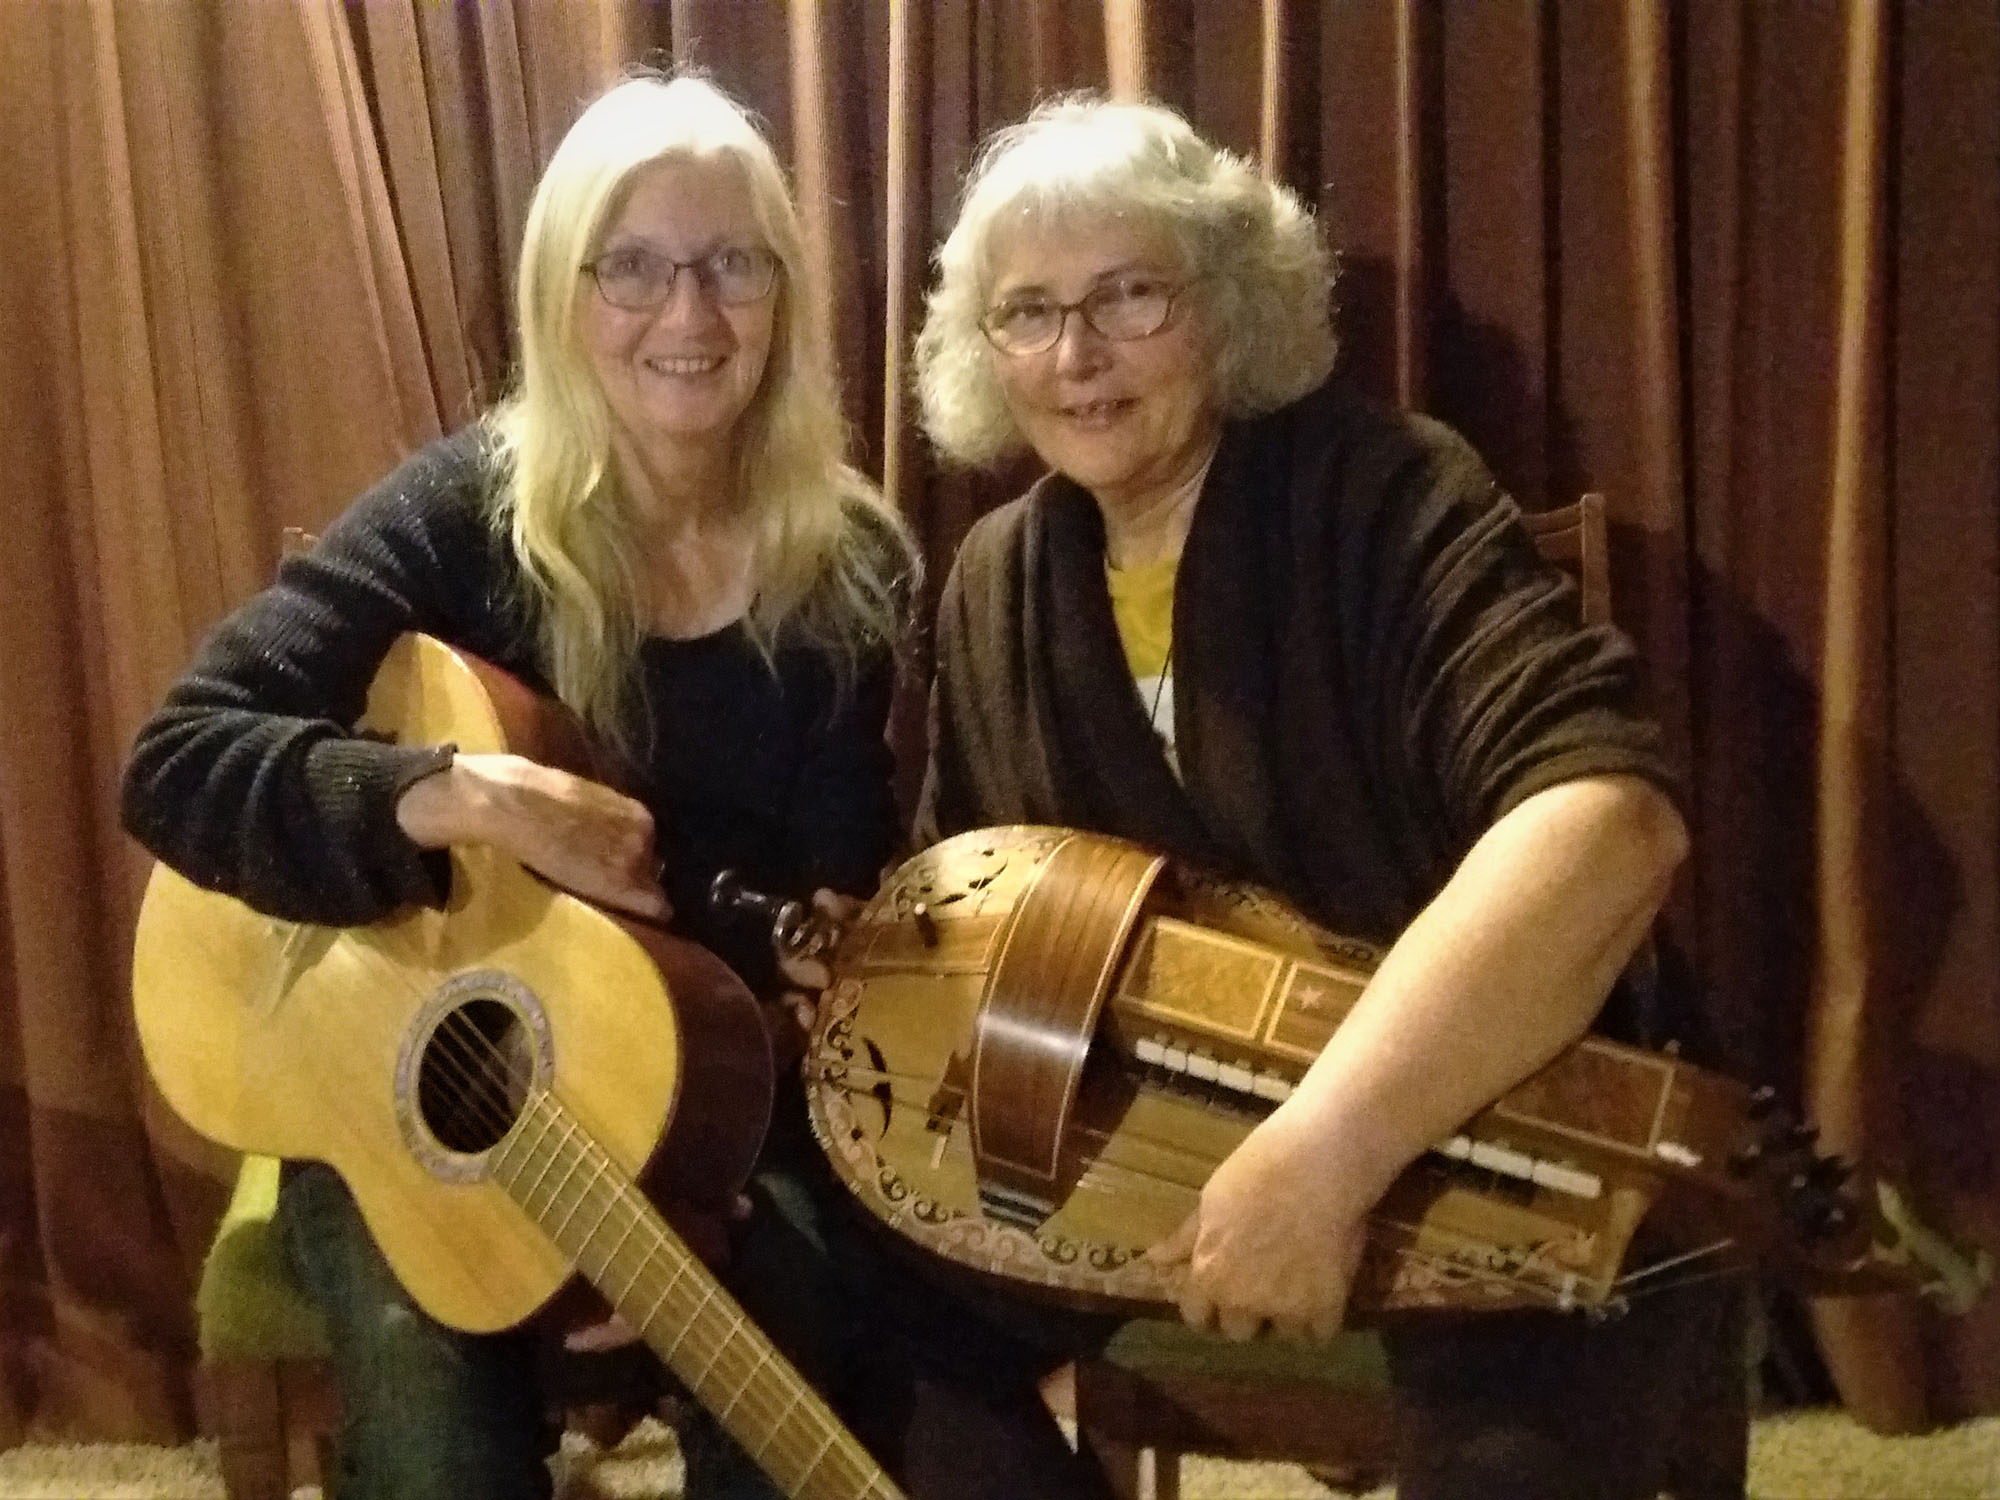 Simple Gifts musical duo